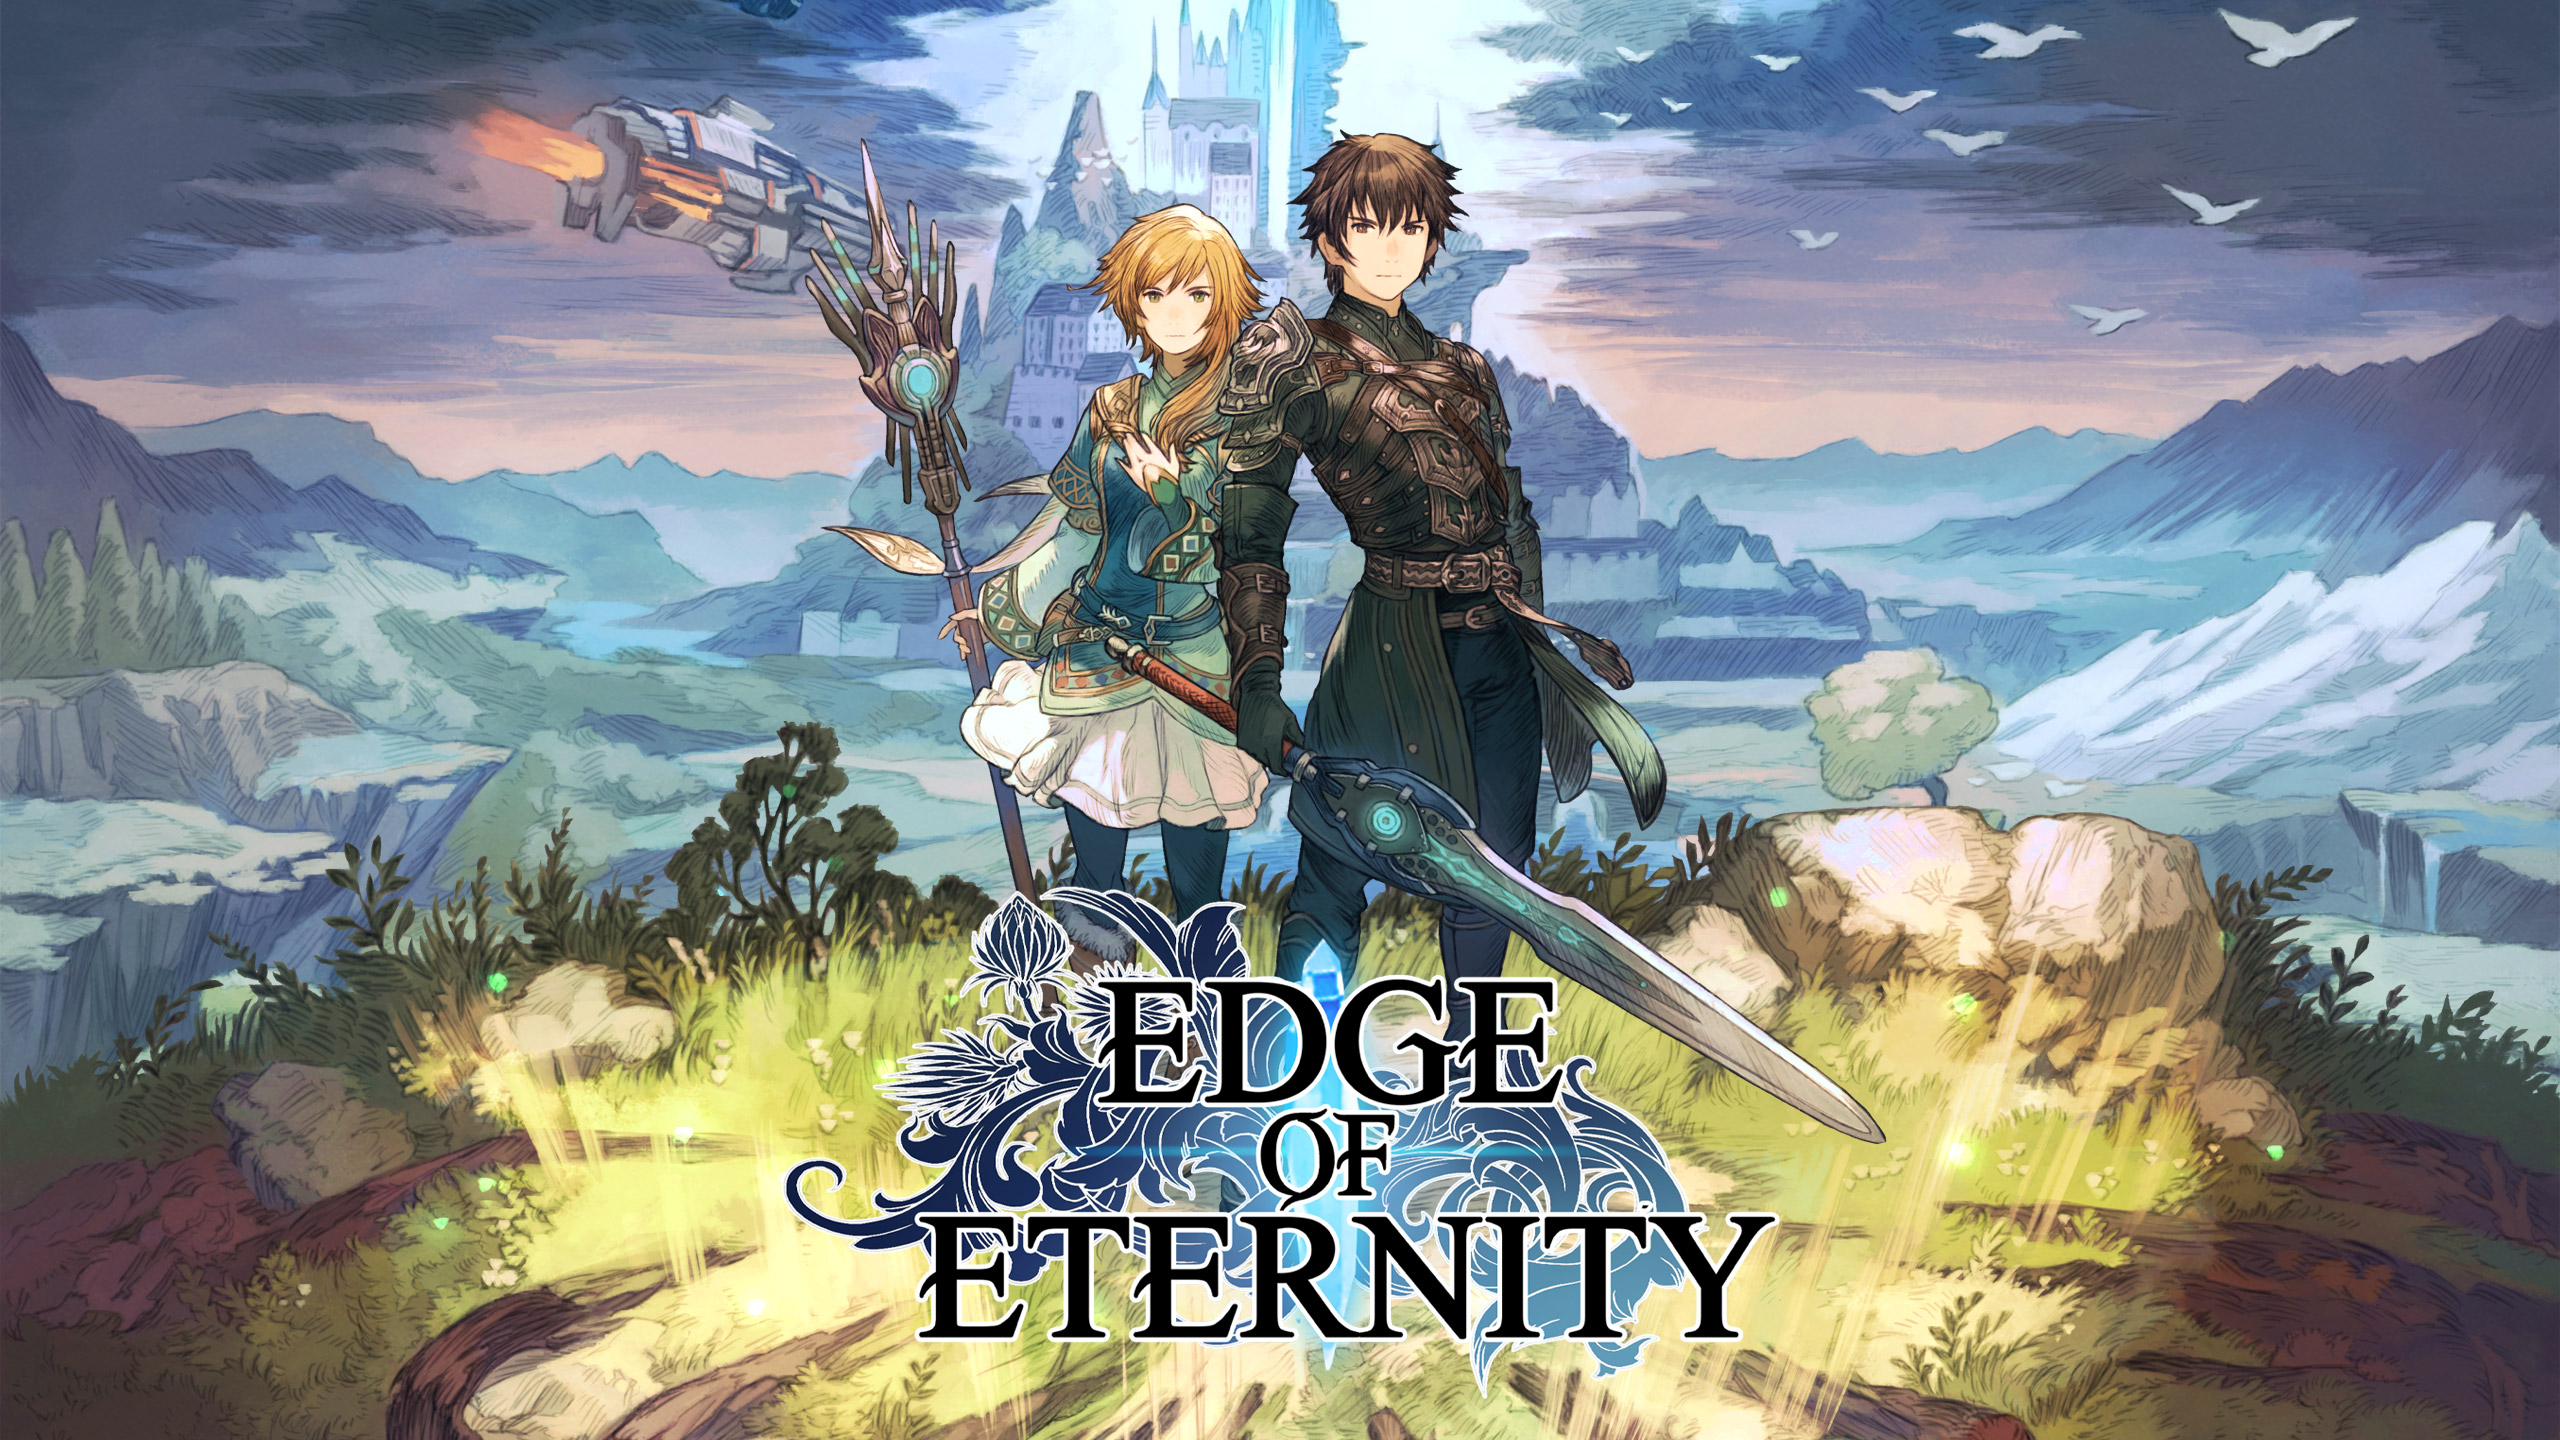 Edge of Eternity is coming to Switch as a Cloud Version in February